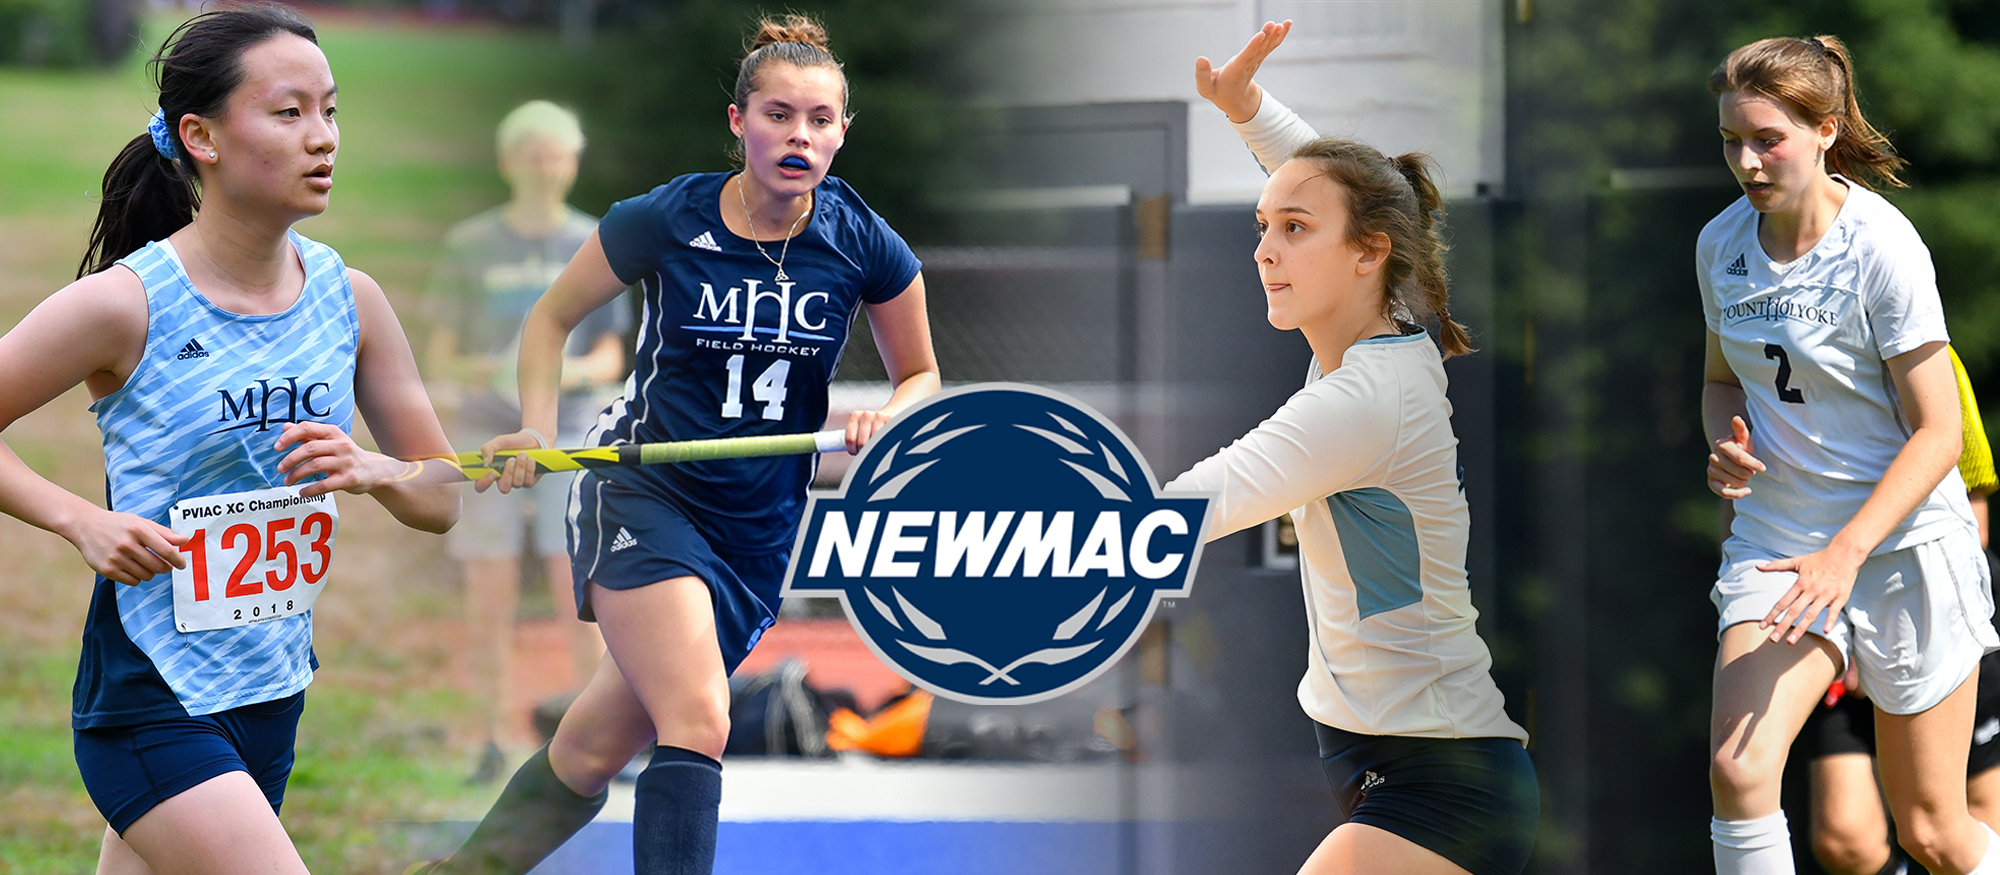 32 Fall Student-Athletes Earn NEWMAC Academic All-Conference Honors